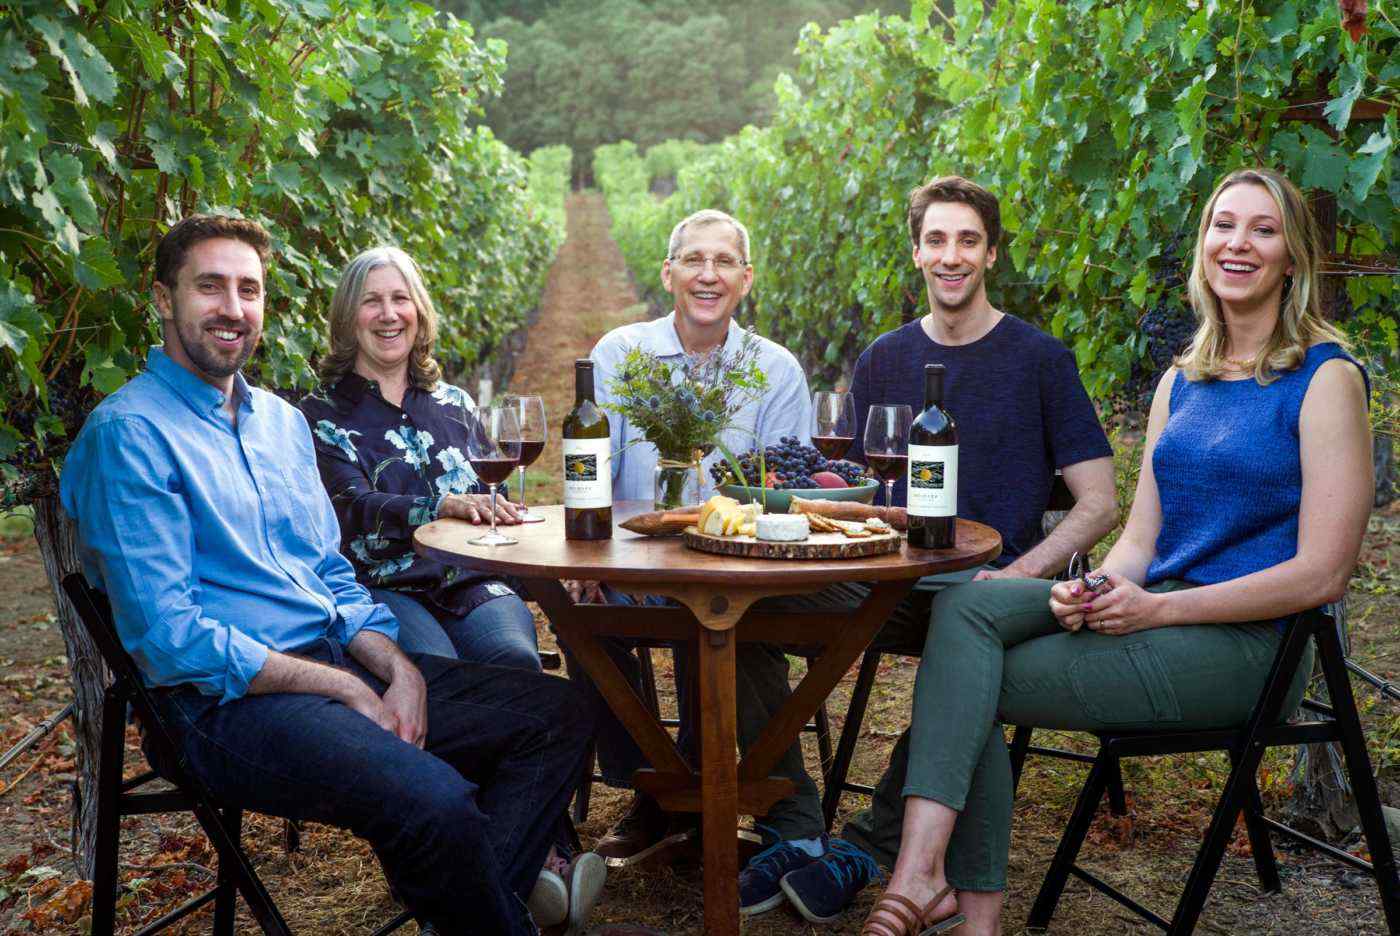 Heimark Family at a table in the vineyard